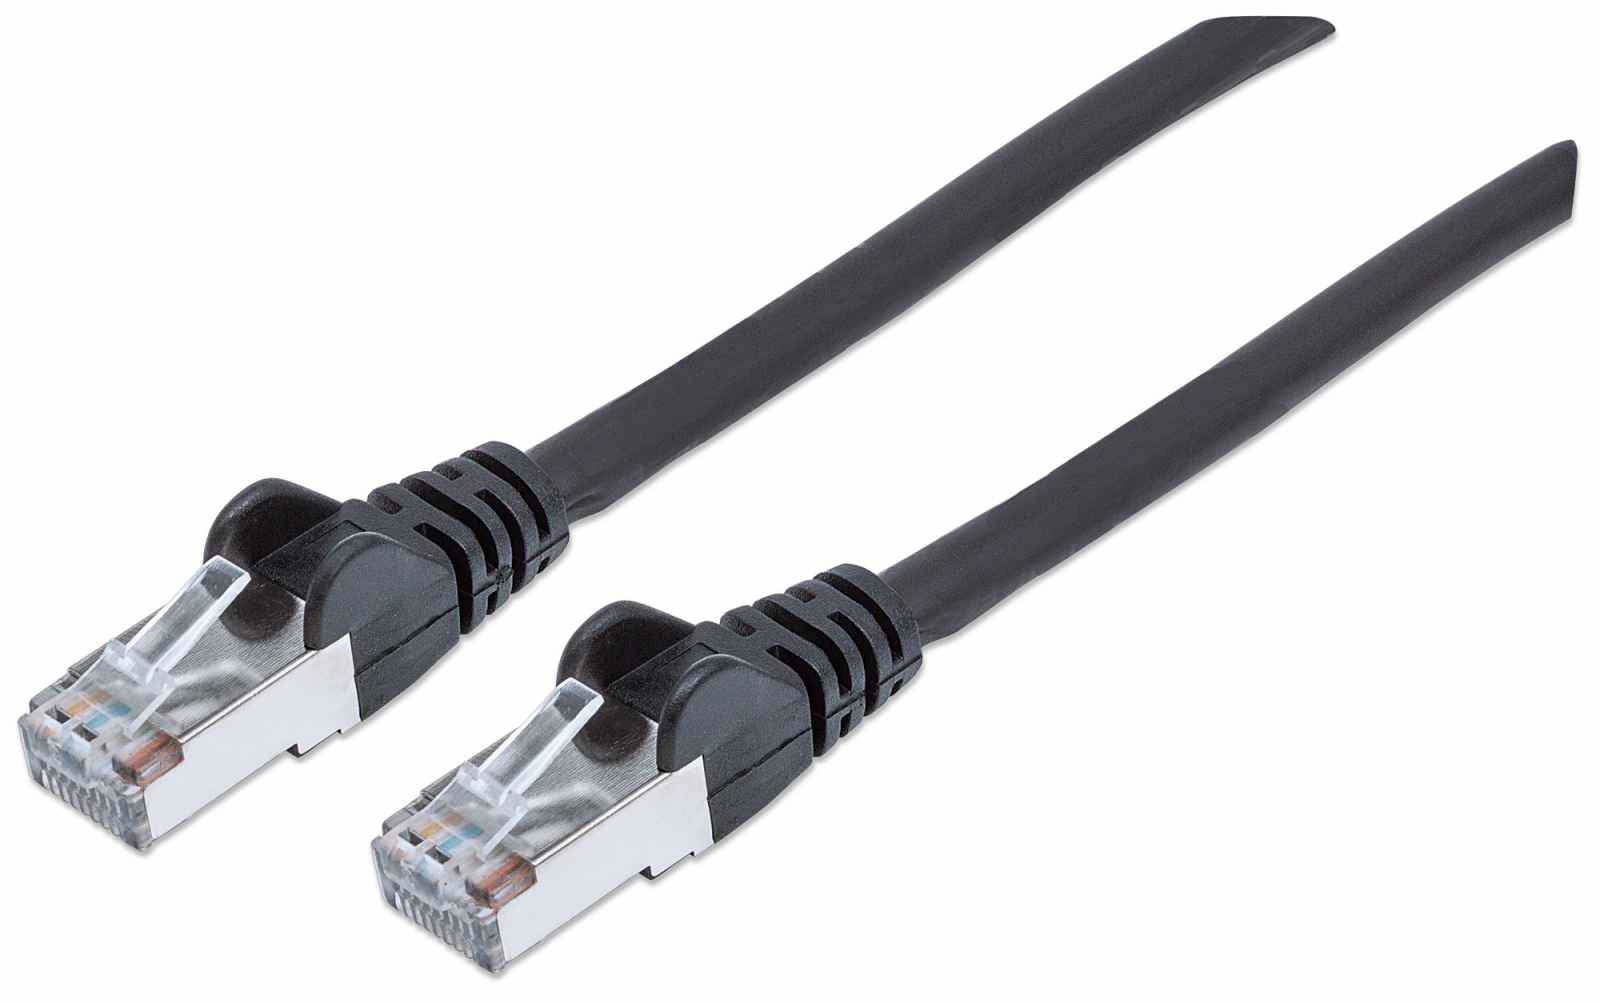 Photos - Cable (video, audio, USB) INTELLINET Network Patch Cable, Cat7 Cable/Cat6A Plugs, 0.25m, Black, 7405 